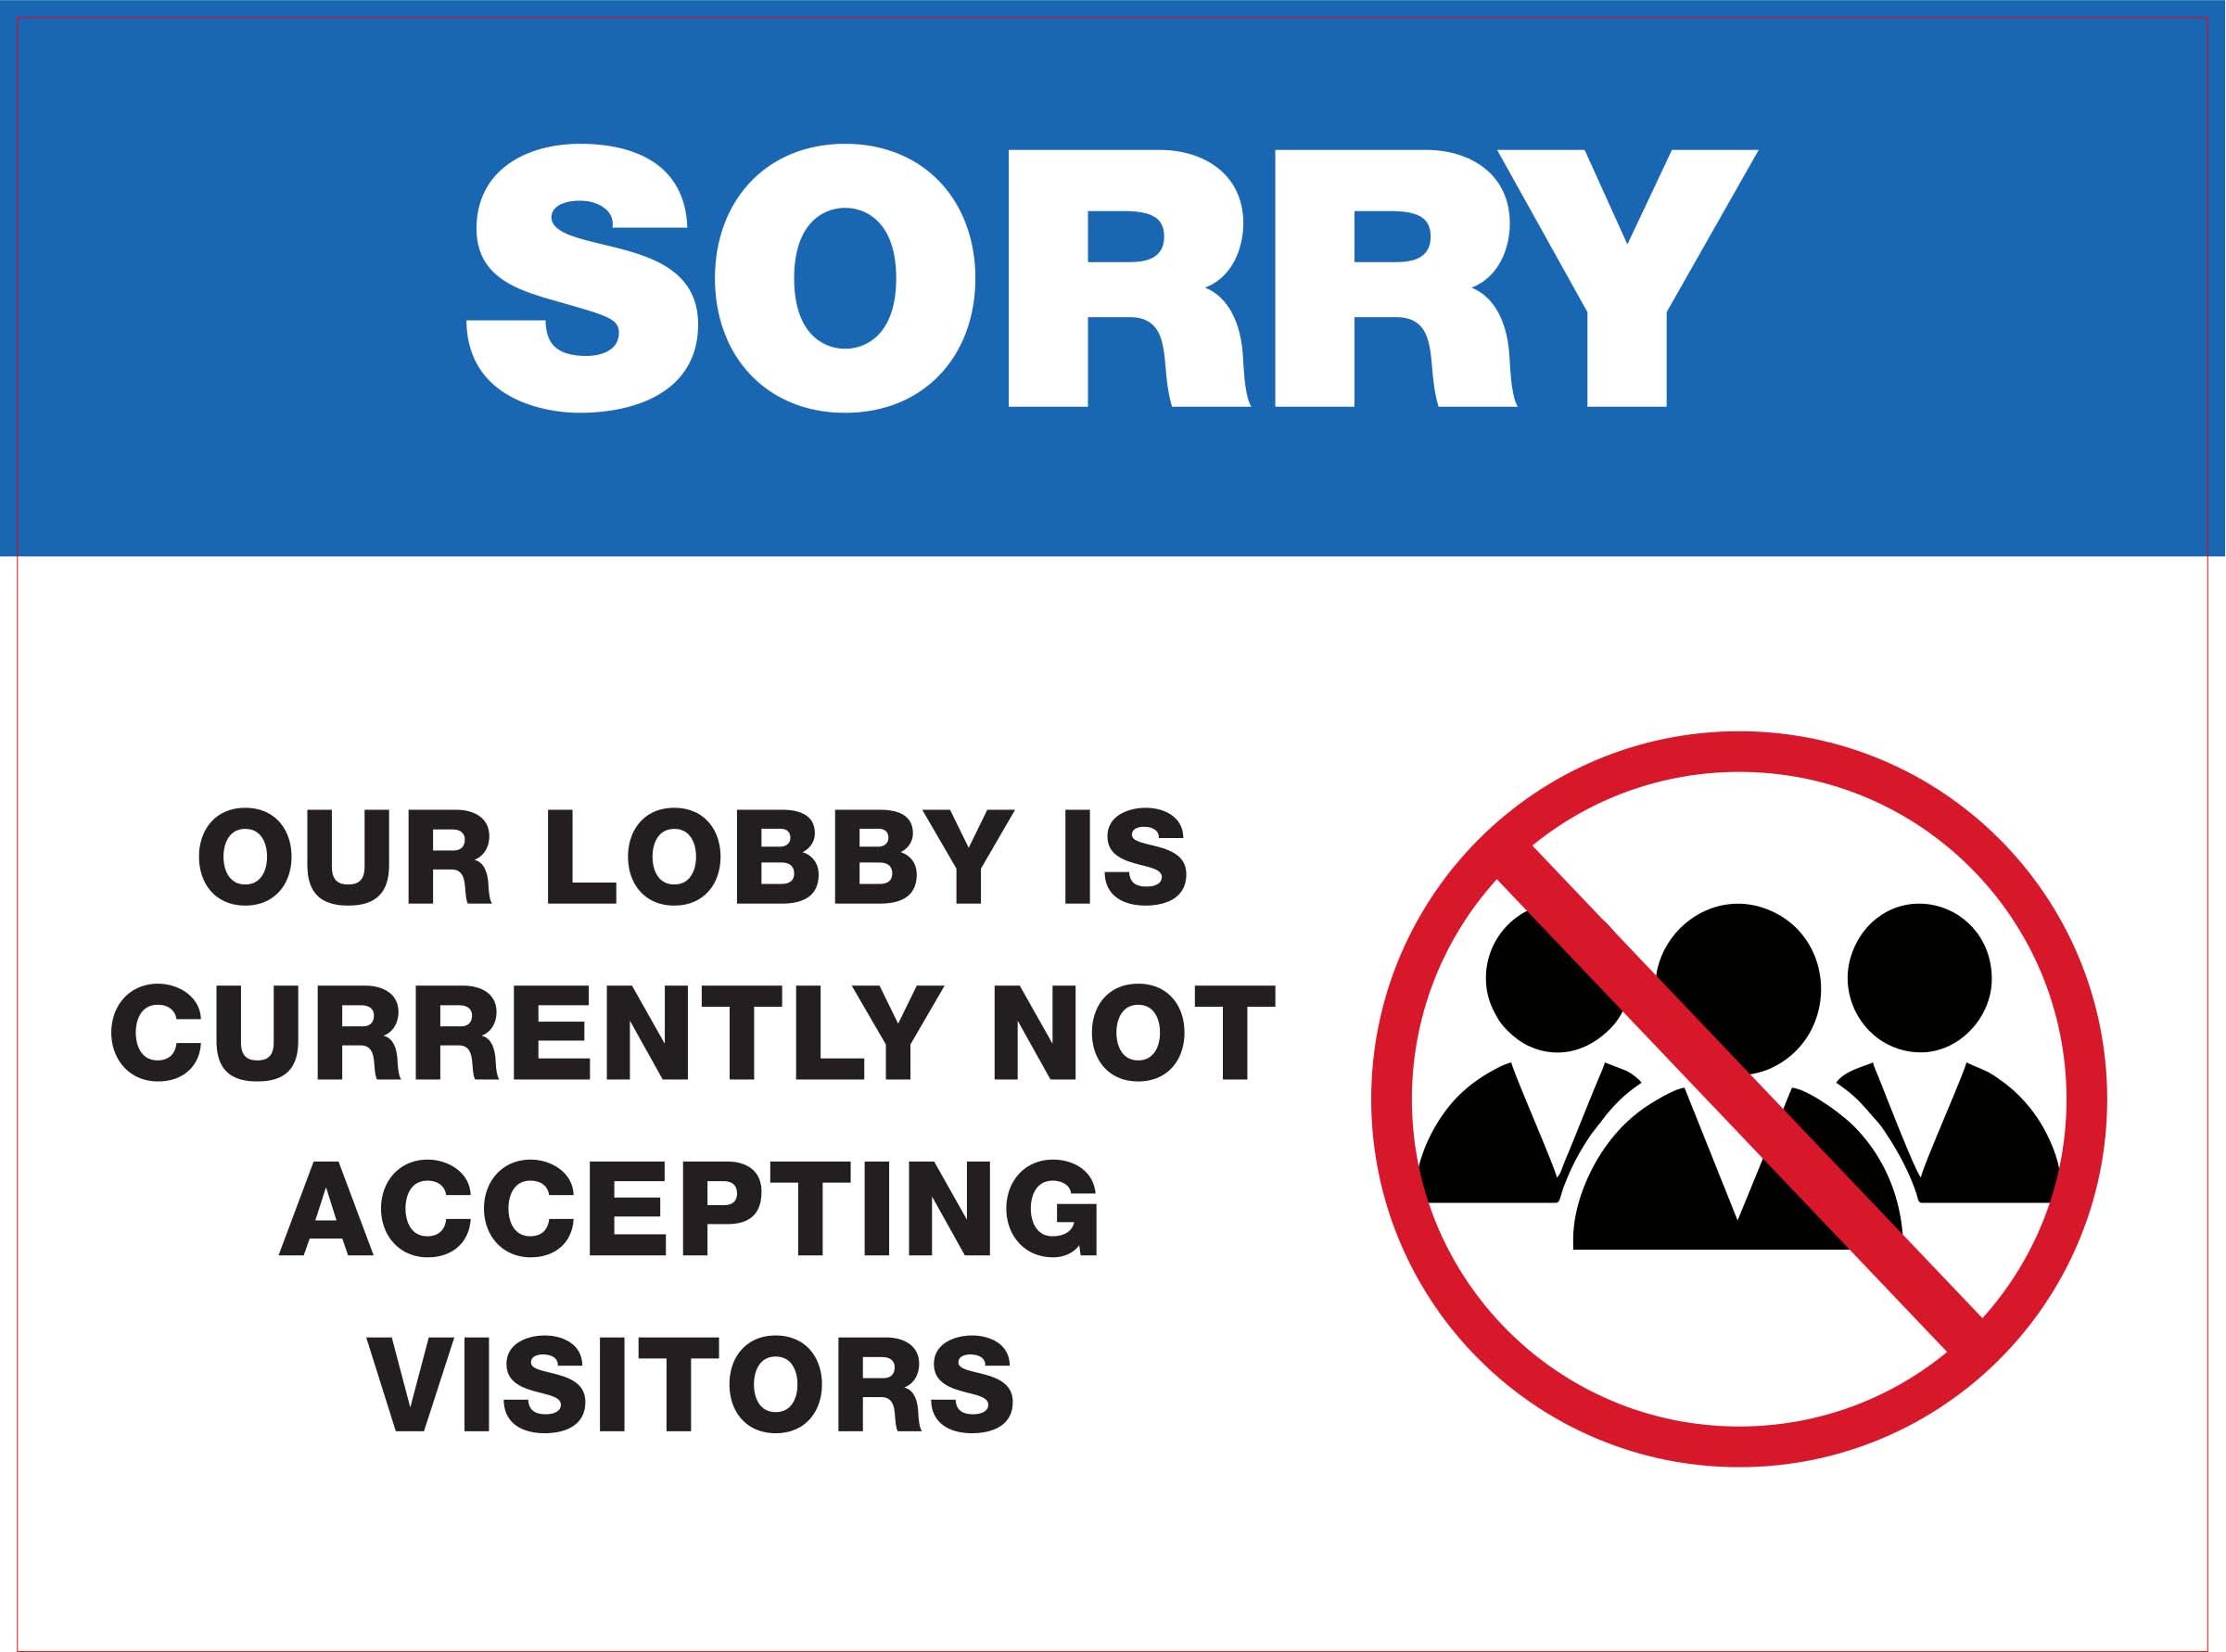 SD - Lobby Closed 6" x 8" Decal - 4 pack